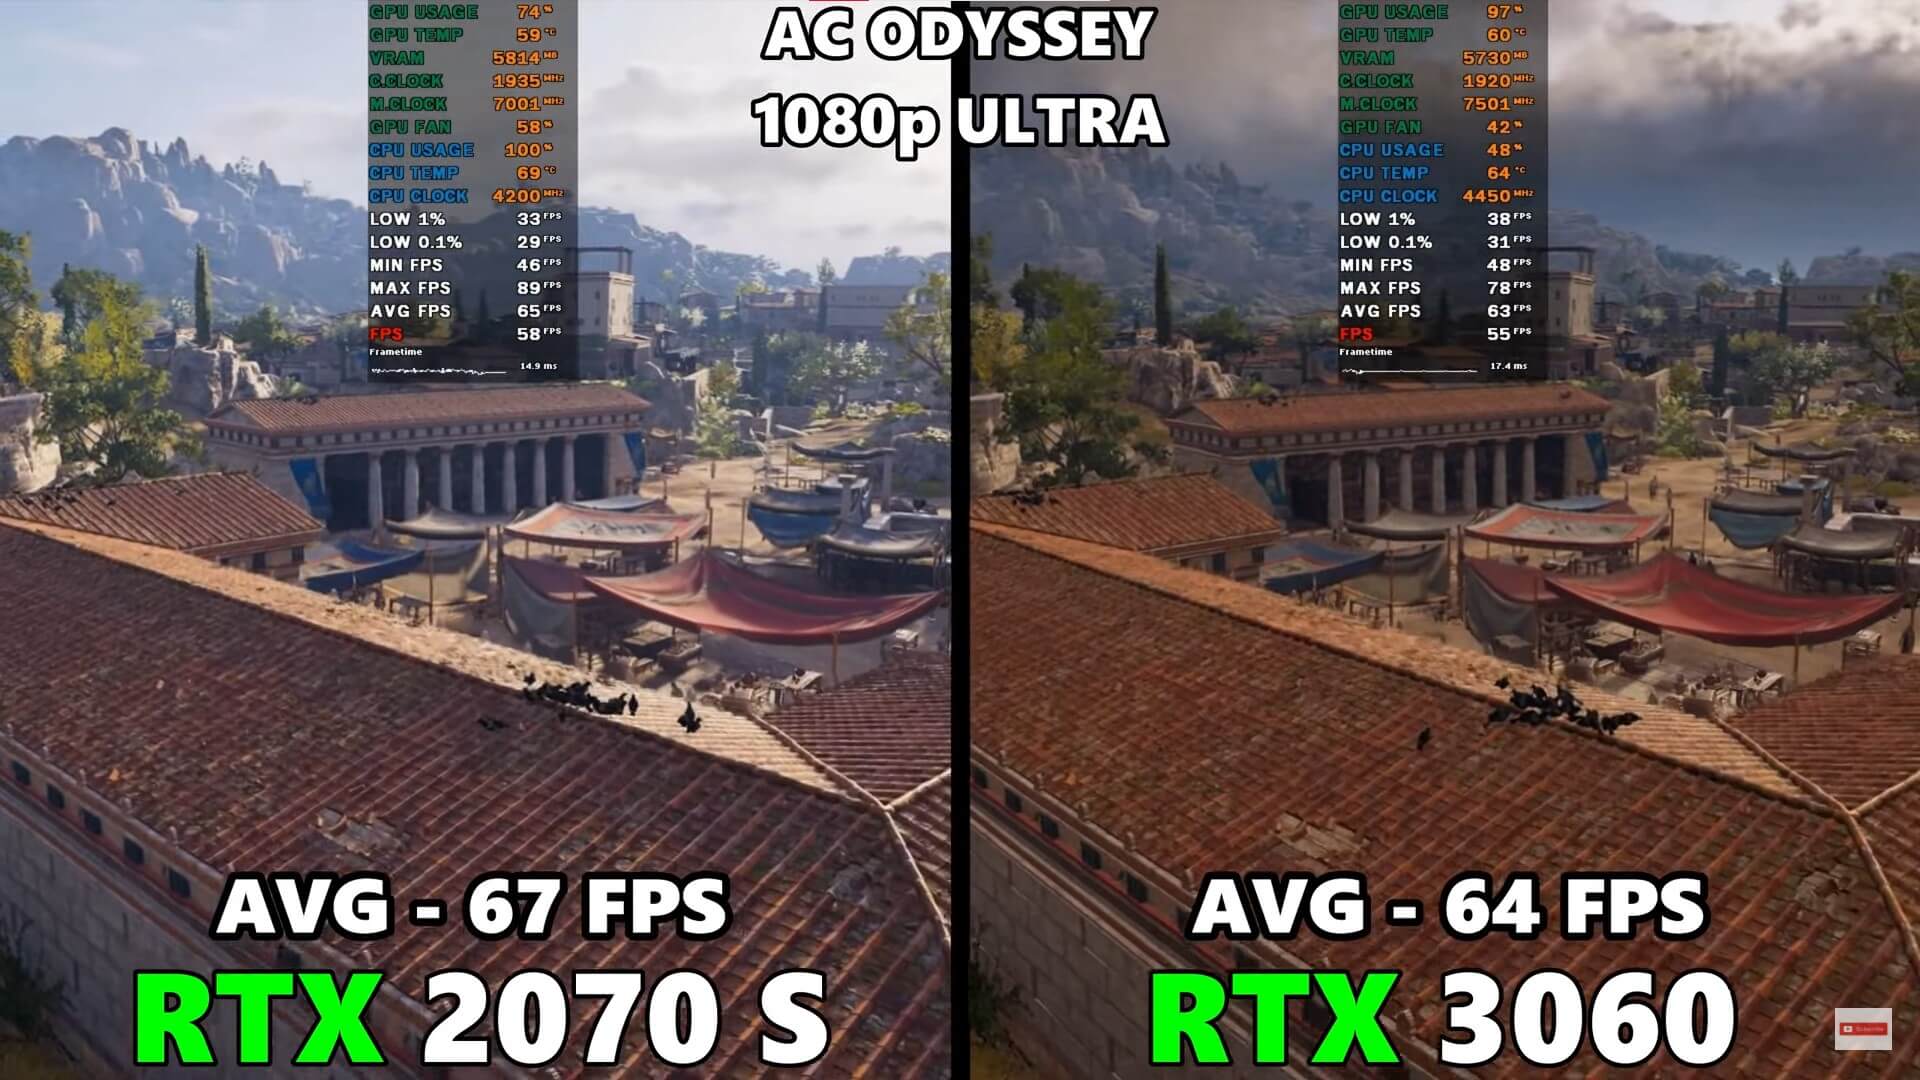 Assassin's Creed Odyssey benchmark tests for two NVIDIA GPUs at 1080P.